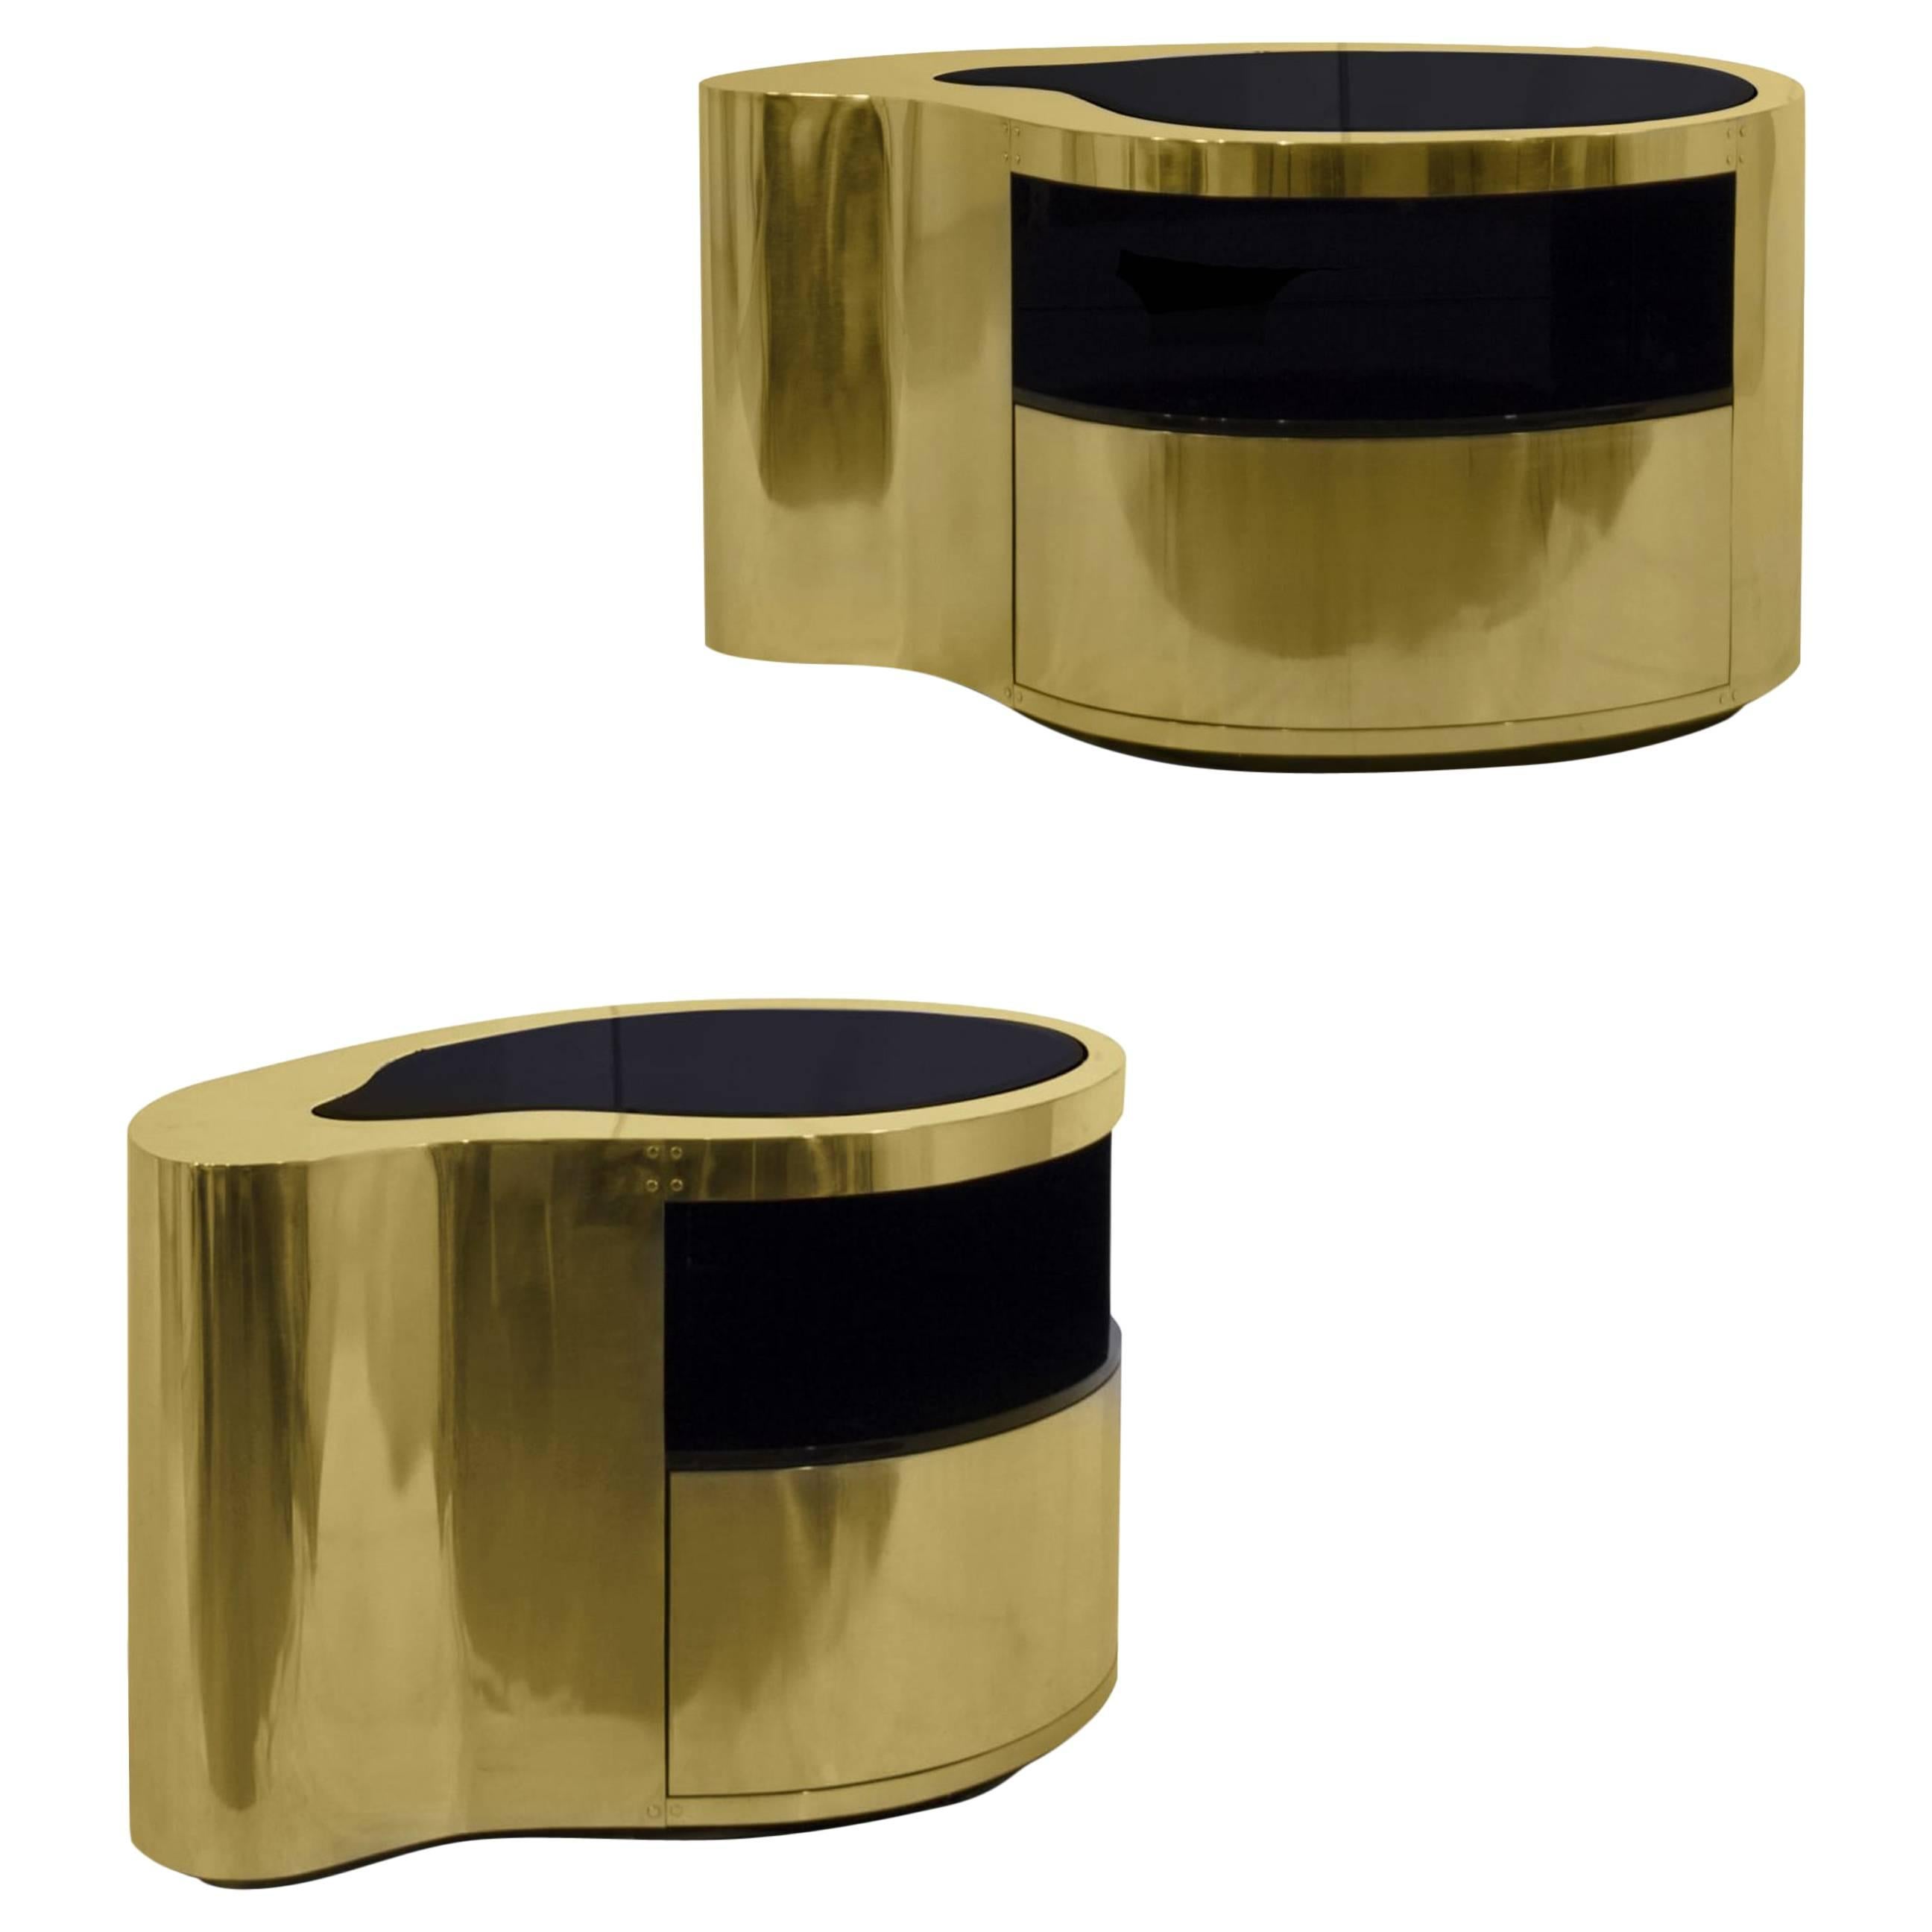 20th Century Inspired Curved Brass Nightstand End Tables